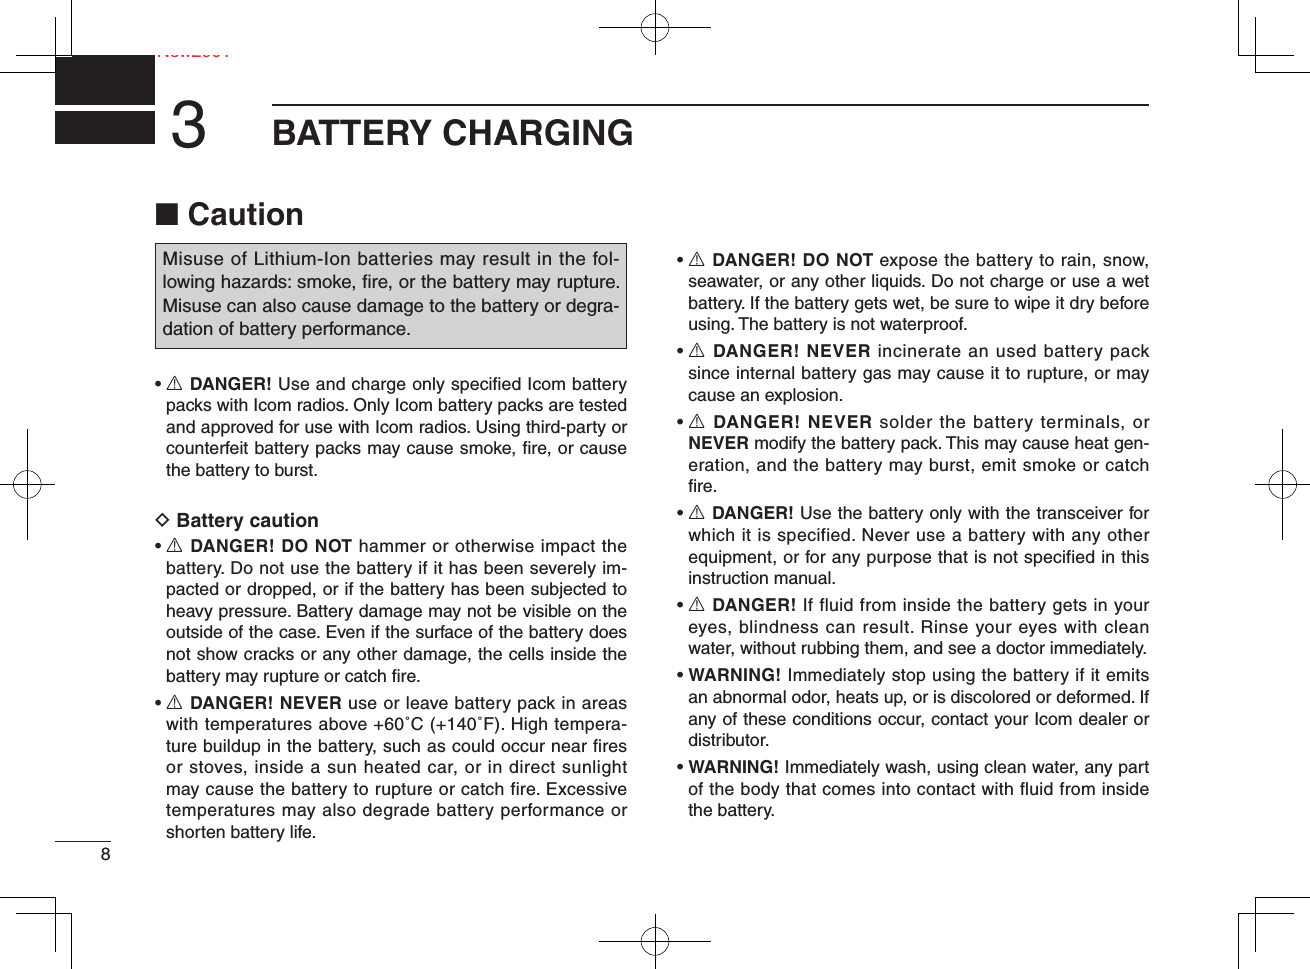 8NeNew2001BATTERY CHARGING3■ Caution•  R DANGER! Use and charge only speciﬁ ed Icom battery packs with Icom radios. Only Icom battery packs are tested and approved for use with Icom radios. Using third-party or counterfeit battery packs may cause smoke, ﬁ re, or cause the battery to burst.D Battery caution•  R DANGER! DO NOT hammer or otherwise impact the battery. Do not use the battery if it has been severely im-pacted or dropped, or if the battery has been subjected to heavy pressure. Battery damage may not be visible on the outside of the case. Even if the surface of the battery does not show cracks or any other damage, the cells inside the battery may rupture or catch ﬁ re.•  R DANGER! NEVER use or leave battery pack in areas with temperatures above +60˚C (+140˚F). High tempera-ture buildup in the battery, such as could occur near fires or stoves, inside a sun heated car, or in direct sunlight may cause the battery to rupture or catch fire. Excessive temperatures may also degrade battery performance or shorten battery life.•  R DANGER! DO NOT expose the battery to rain, snow, seawater, or any other liquids. Do not charge or use a wet battery. If the battery gets wet, be sure to wipe it dry before using. The battery is not waterproof.•  R DANGER! NEVER incinerate an used battery pack since internal battery gas may cause it to rupture, or may cause an explosion.•  R DANGER! NEVER solder the battery terminals, or NEVER modify the battery pack. This may cause heat gen-eration, and the battery may burst, emit smoke or catch ﬁ re.•  R DANGER! Use the battery only with the transceiver for which it is specified. Never use a battery with any other equipment, or for any purpose that is not specified in this instruction manual.•  R DANGER! If fluid from inside the battery gets in your eyes, blindness can result. Rinse your eyes with clean water, without rubbing them, and see a doctor immediately.•  WARNING! Immediately stop using the battery if it emits an abnormal odor, heats up, or is discolored or deformed. If any of these conditions occur, contact your Icom dealer or distributor.•  WARNING! Immediately wash, using clean water, any part of the body that comes into contact with fluid from inside the battery.Misuse of Lithium-Ion batteries may result in the fol-lowing hazards: smoke, ﬁ re, or the battery may rupture. Misuse can also cause damage to the battery or degra-dation of battery performance.